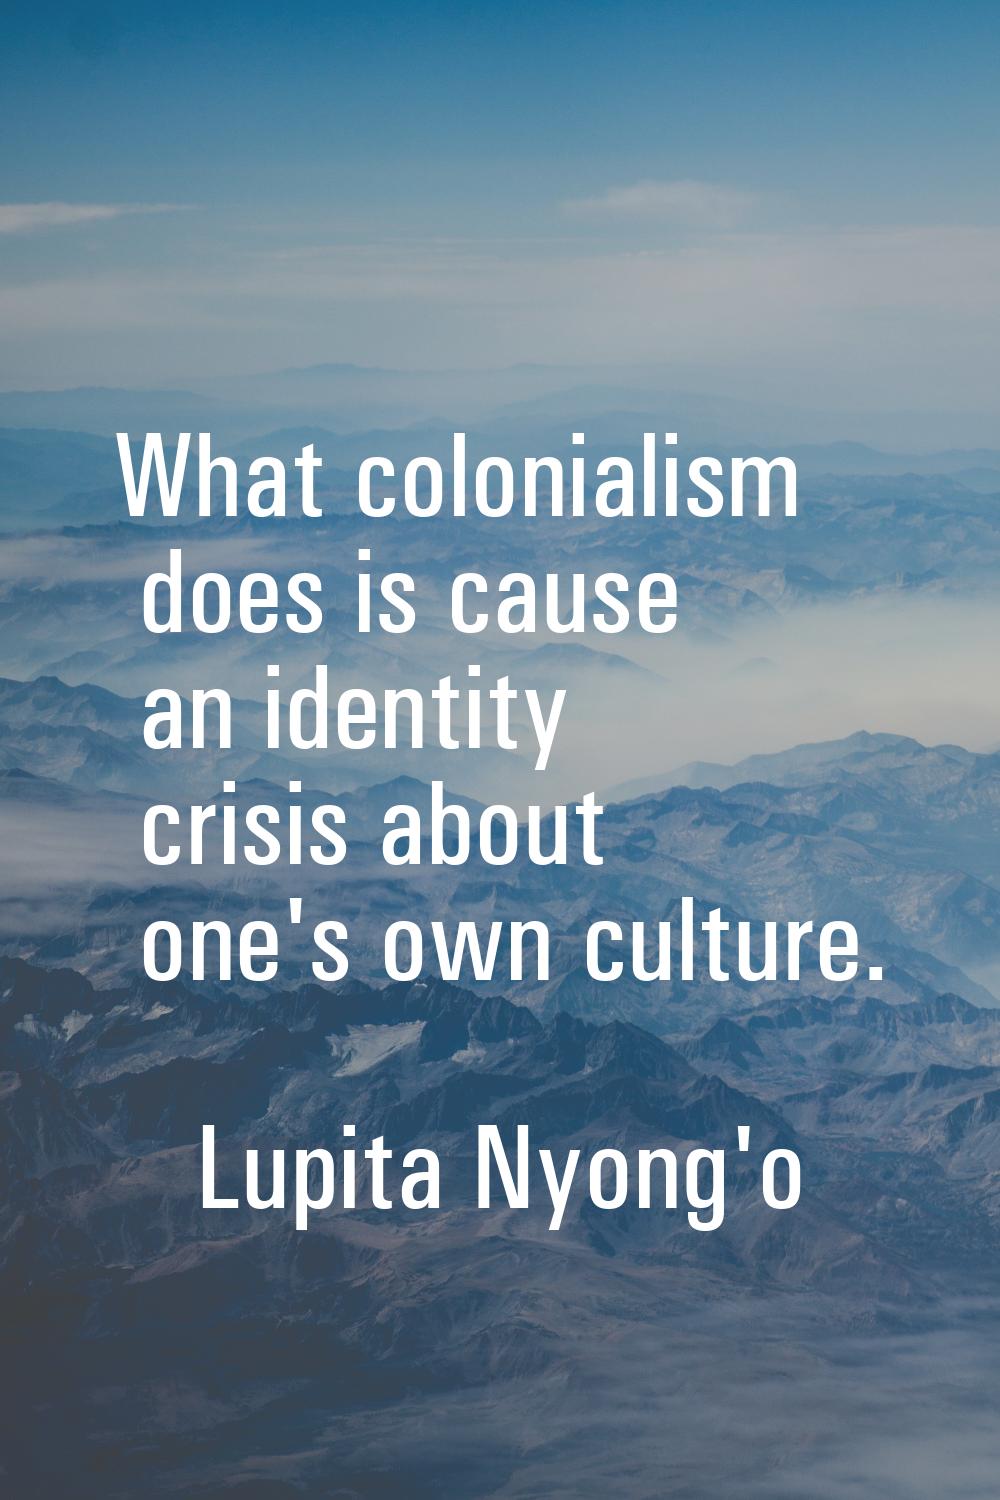 What colonialism does is cause an identity crisis about one's own culture.